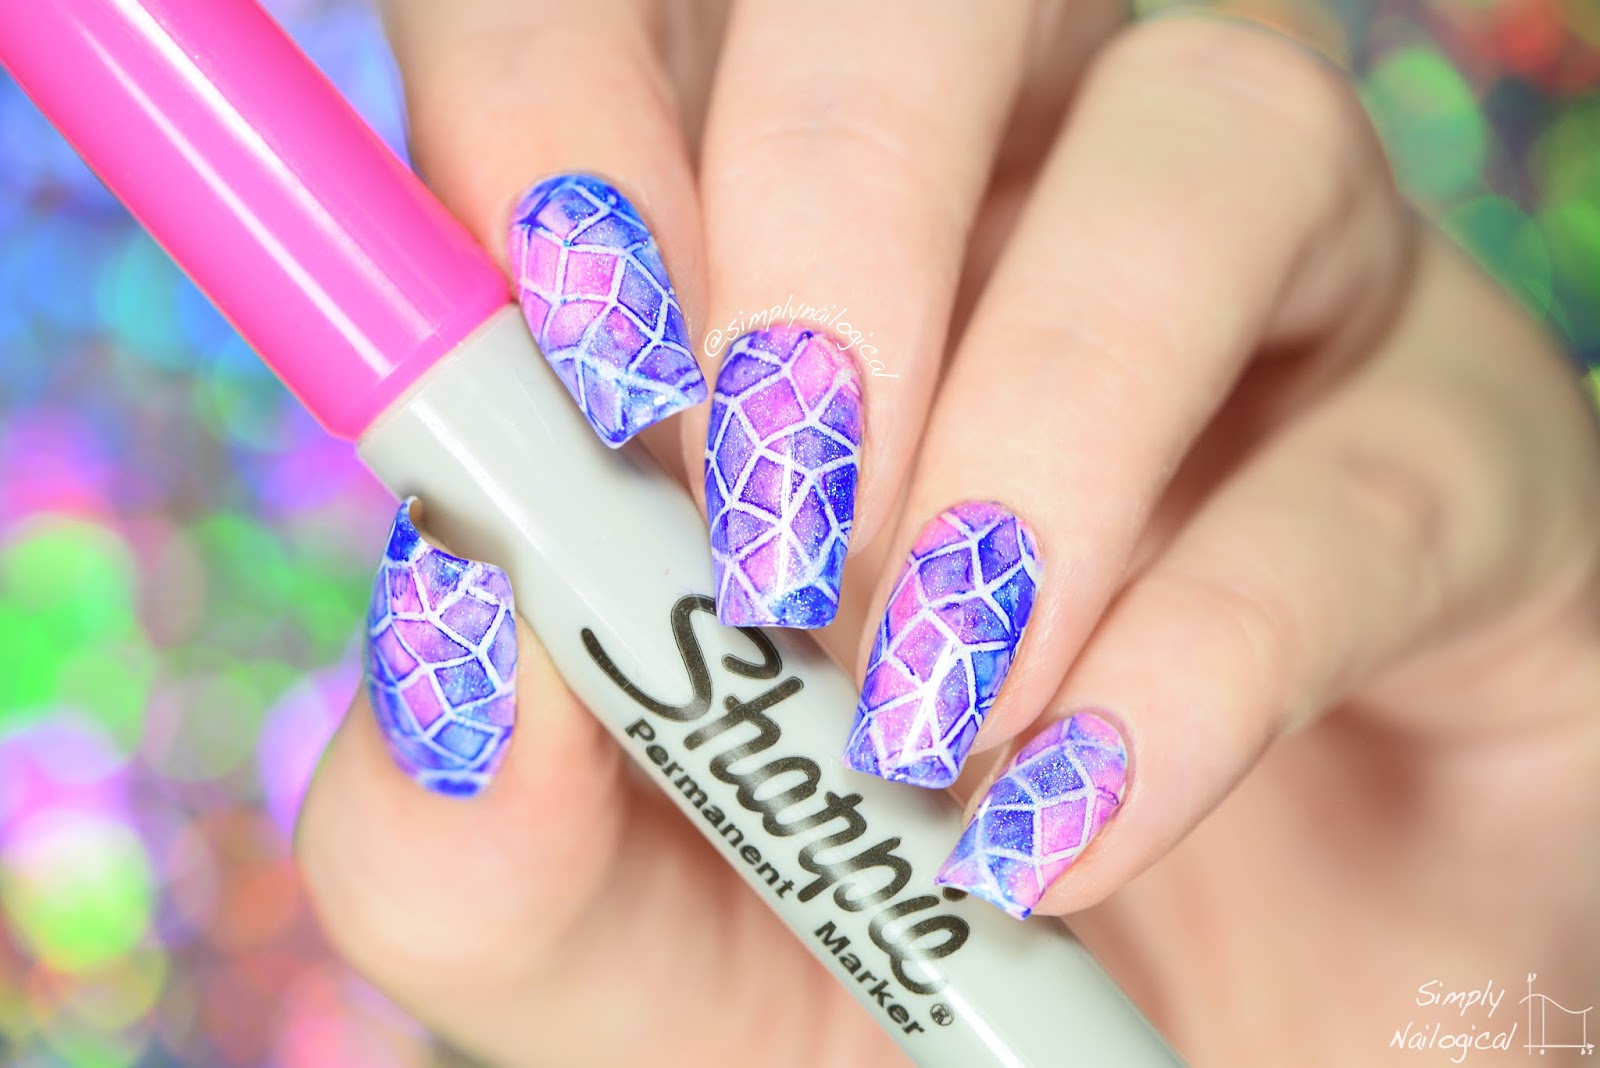 10. "Skeleton Nail Art" by Simply Nailogical - wide 1